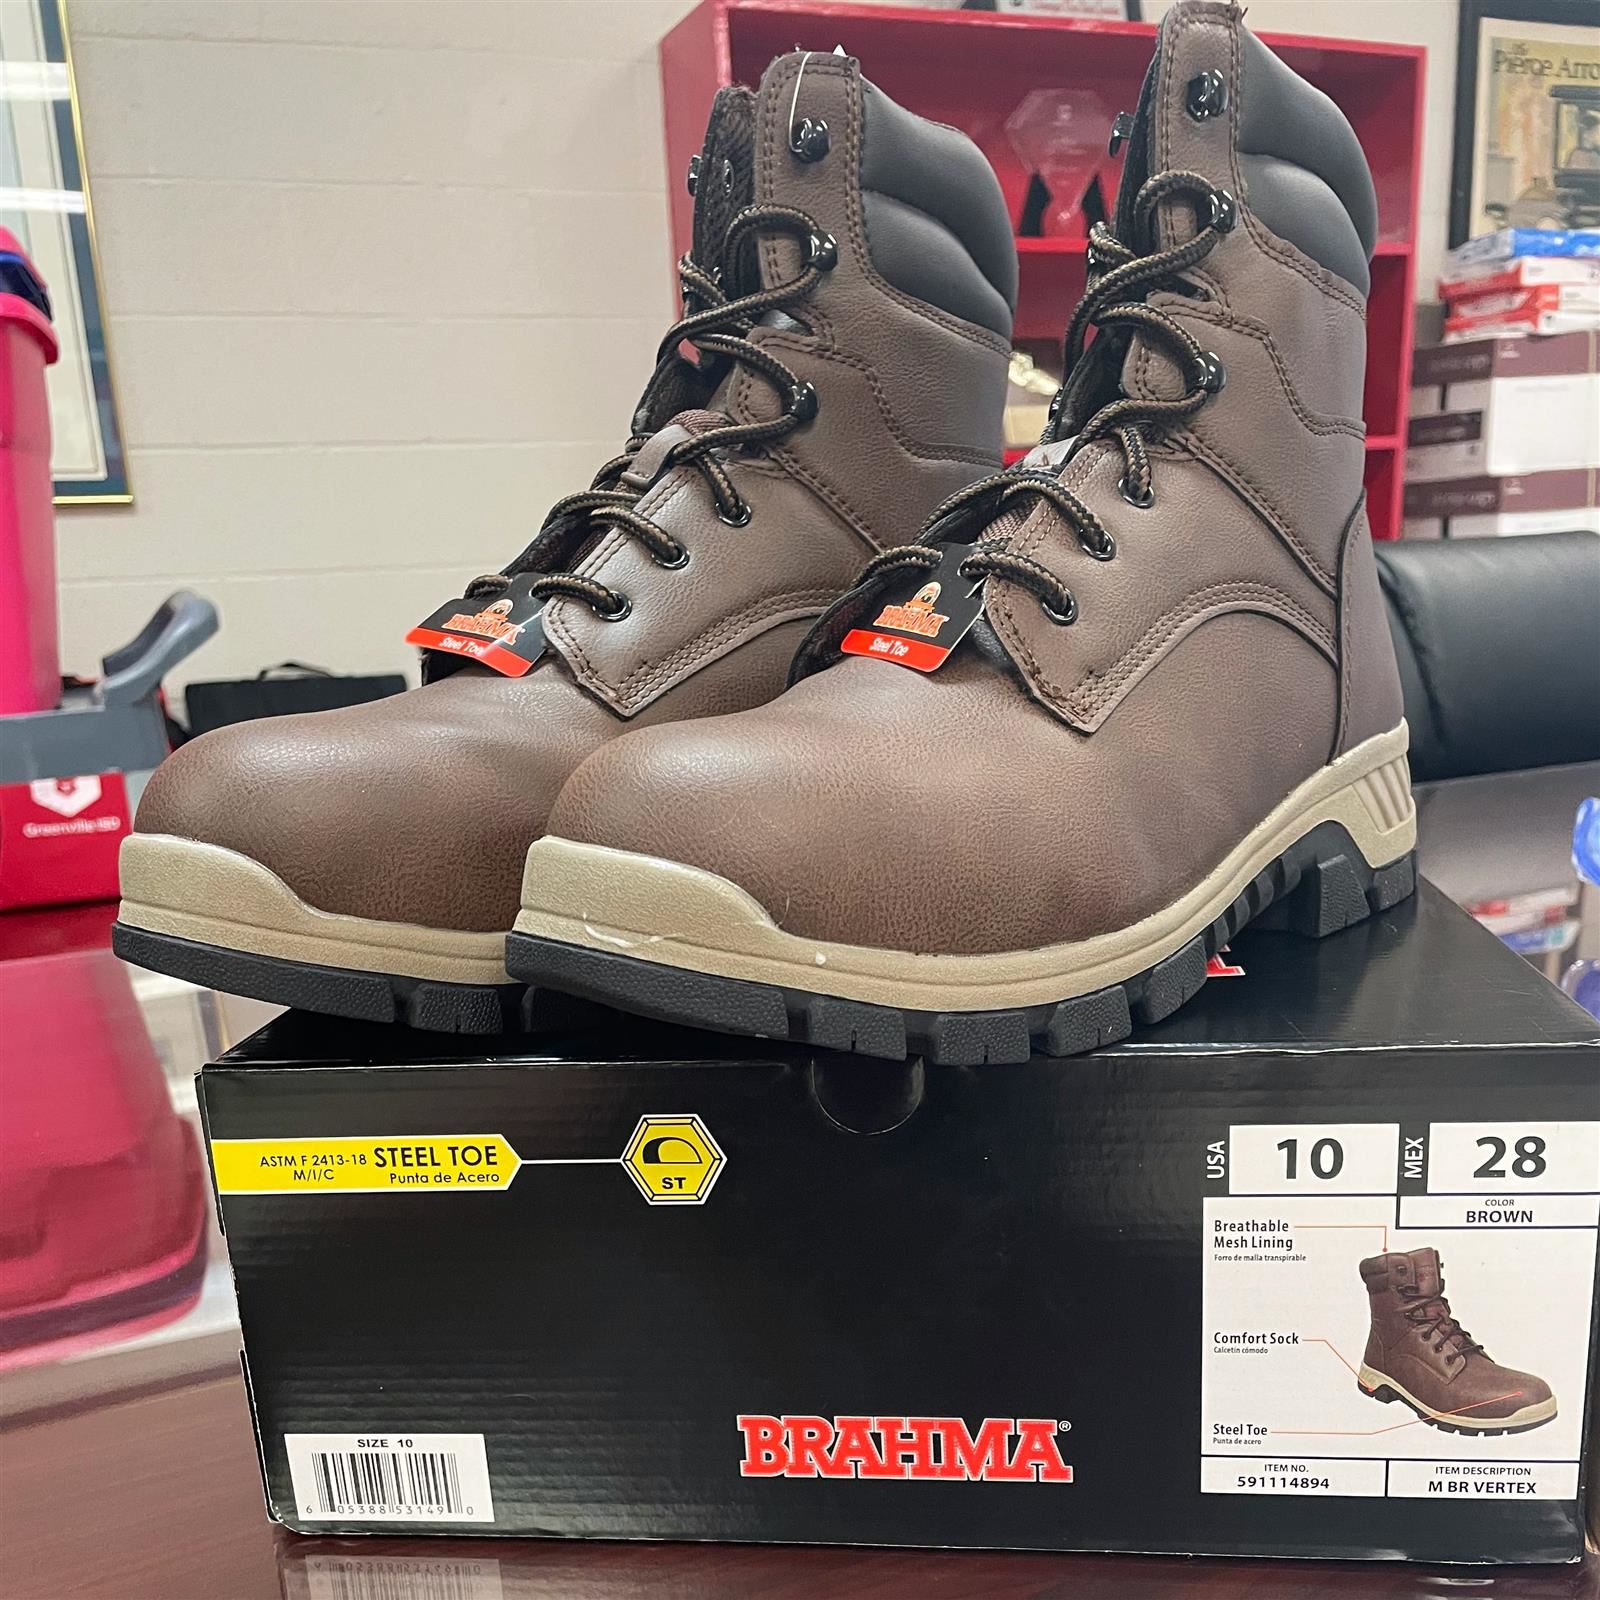 These boots were made for working: GHS parent donates work boots to single father of 2